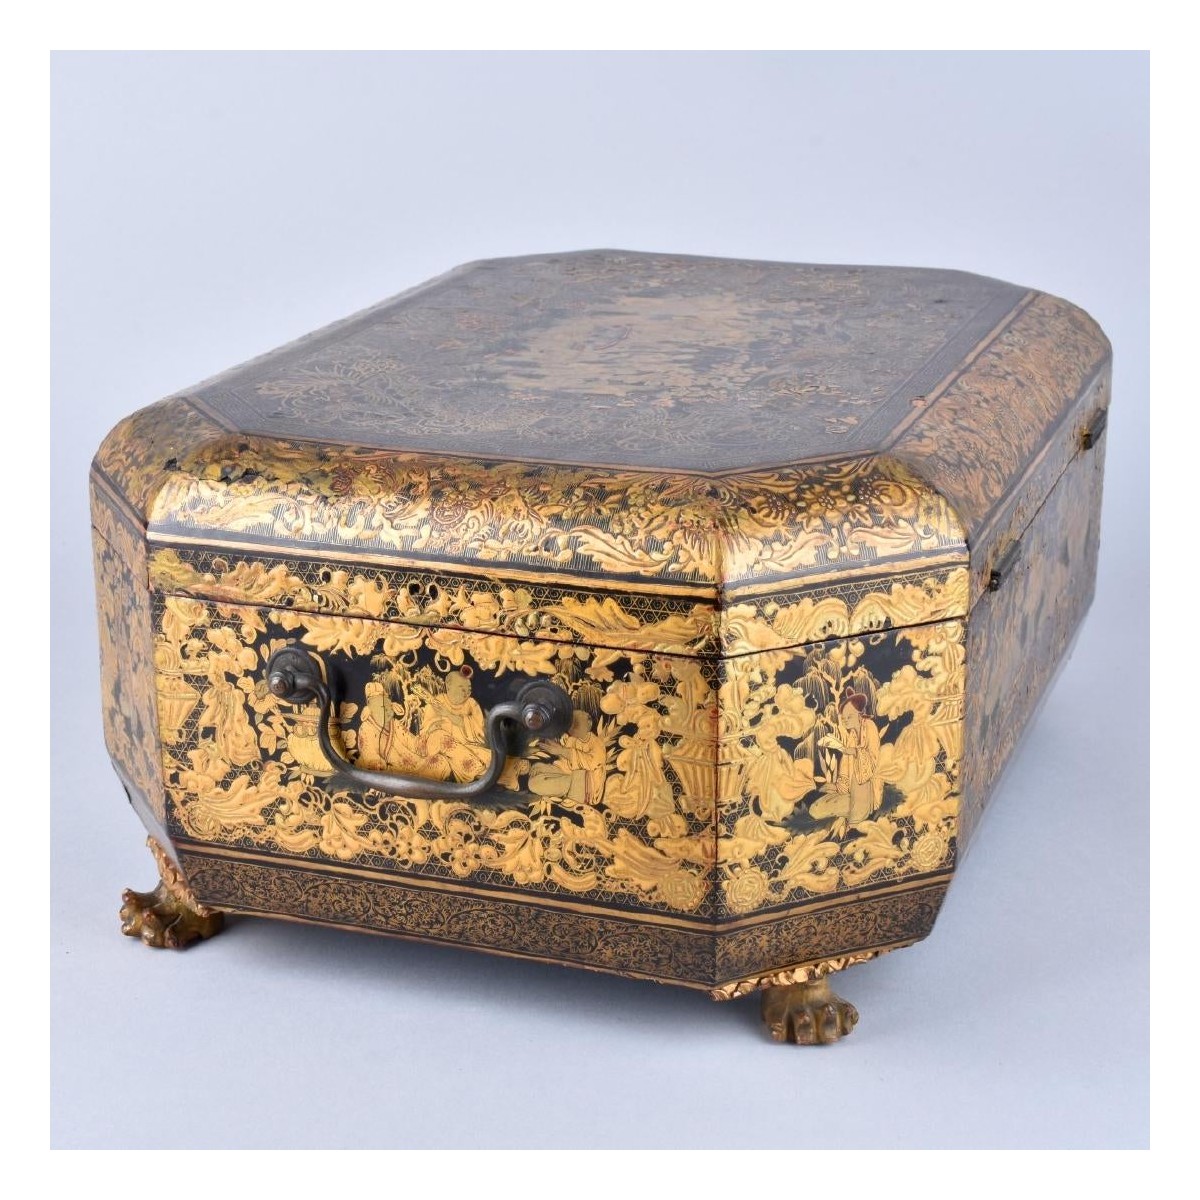 Chinese Export Sewing Box